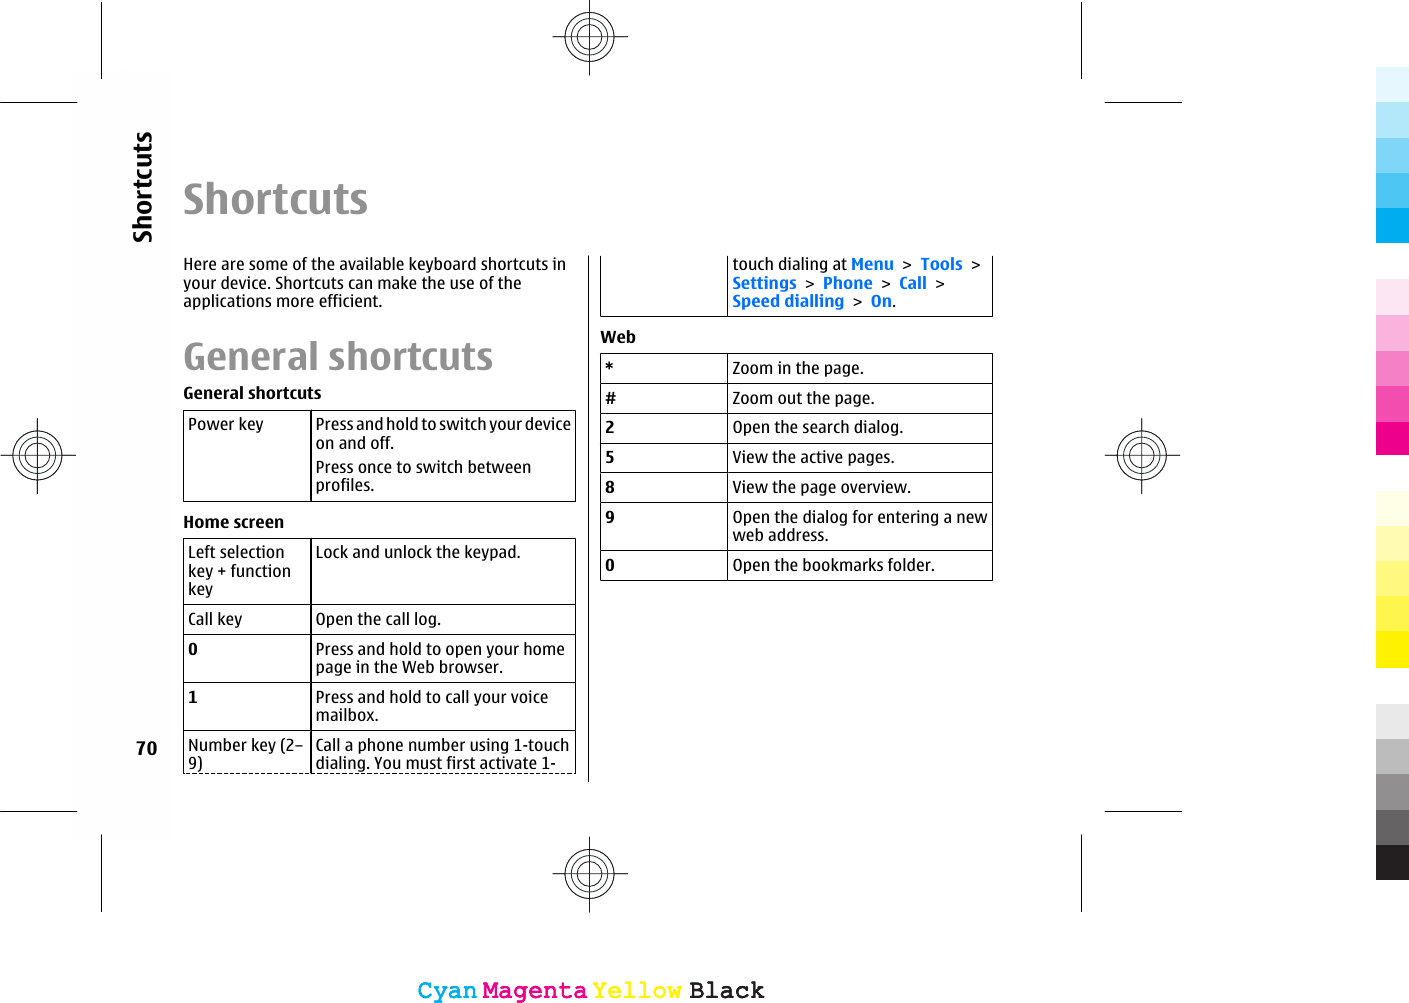 ShortcutsHere are some of the available keyboard shortcuts inyour device. Shortcuts can make the use of theapplications more efficient.General shortcutsGeneral shortcutsPower key Press and hold to switch your deviceon and off.Press once to switch betweenprofiles.Home screenLeft selectionkey + functionkeyLock and unlock the keypad.Call key Open the call log.0Press and hold to open your homepage in the Web browser.1Press and hold to call your voicemailbox.Number key (2–9)Call a phone number using 1-touchdialing. You must first activate 1-touch dialing at Menu &gt; Tools &gt;Settings &gt; Phone &gt; Call &gt;Speed dialling &gt; On.Web*Zoom in the page.#Zoom out the page.2Open the search dialog.5View the active pages.8View the page overview.9Open the dialog for entering a newweb address.0Open the bookmarks folder.70ShortcutsCyanCyanMagentaMagentaYellowYellowBlackBlackCyanCyanMagentaMagentaYellowYellowBlackBlack